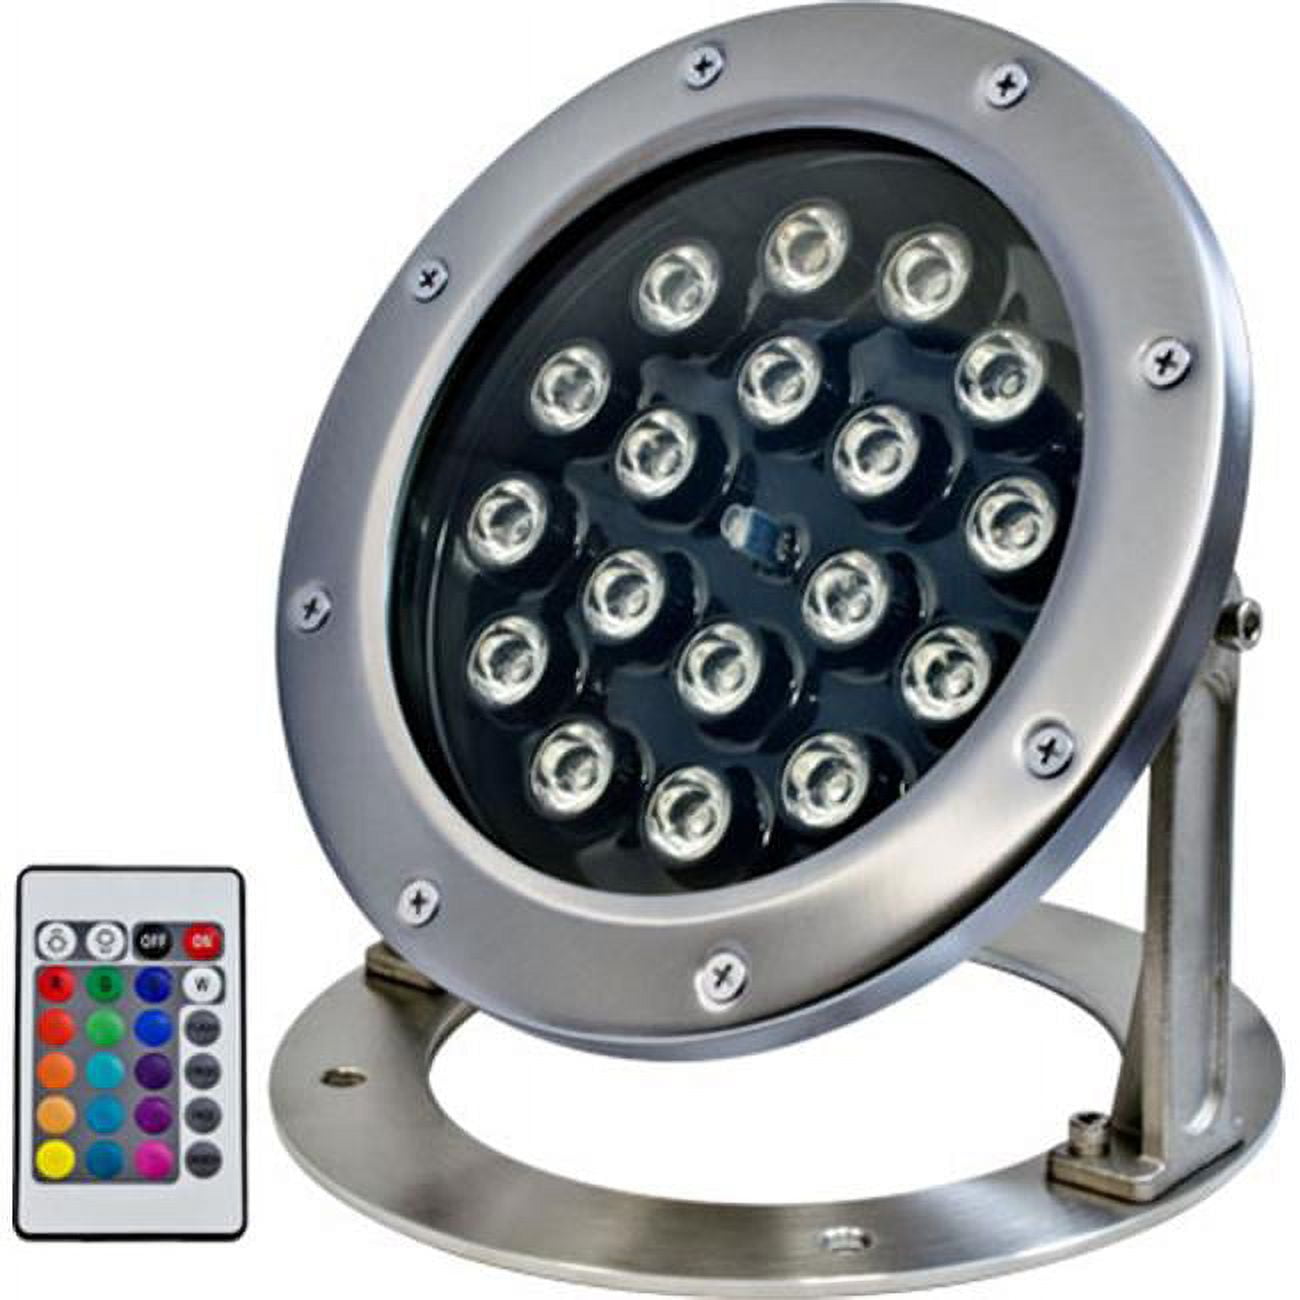 Picture of Dabmar Lighting LV-LED360-SS316-MC 21 ft. Cord 12 V Marine Grade 316 Stainless Steel 18 watts LED Underwater Fixture, Multi-Color